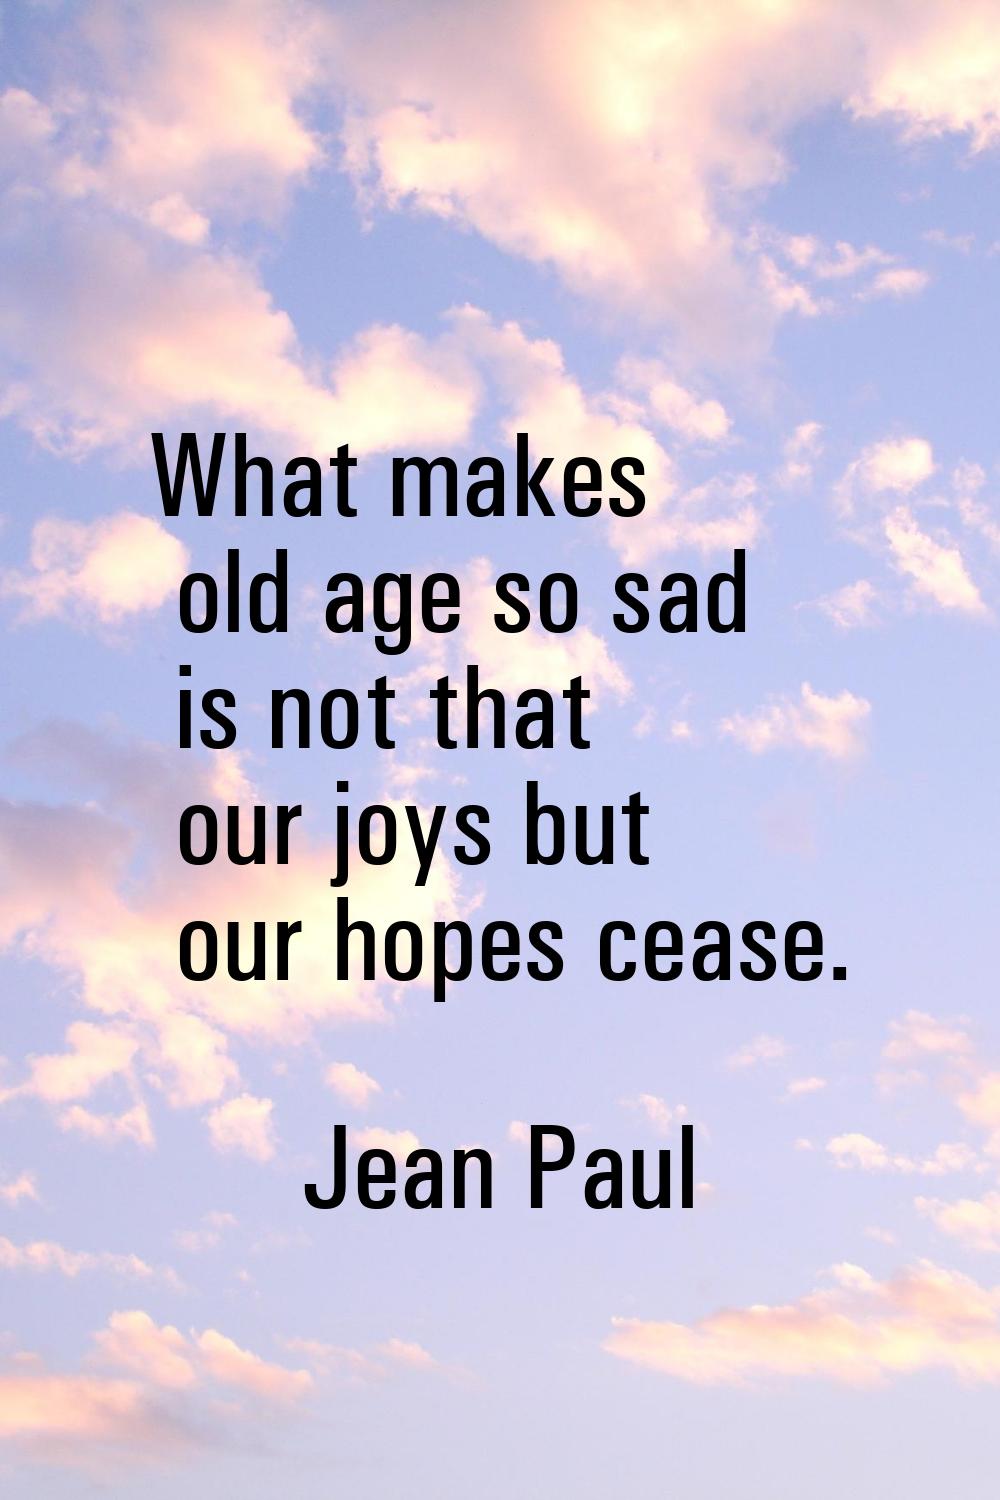 What makes old age so sad is not that our joys but our hopes cease.